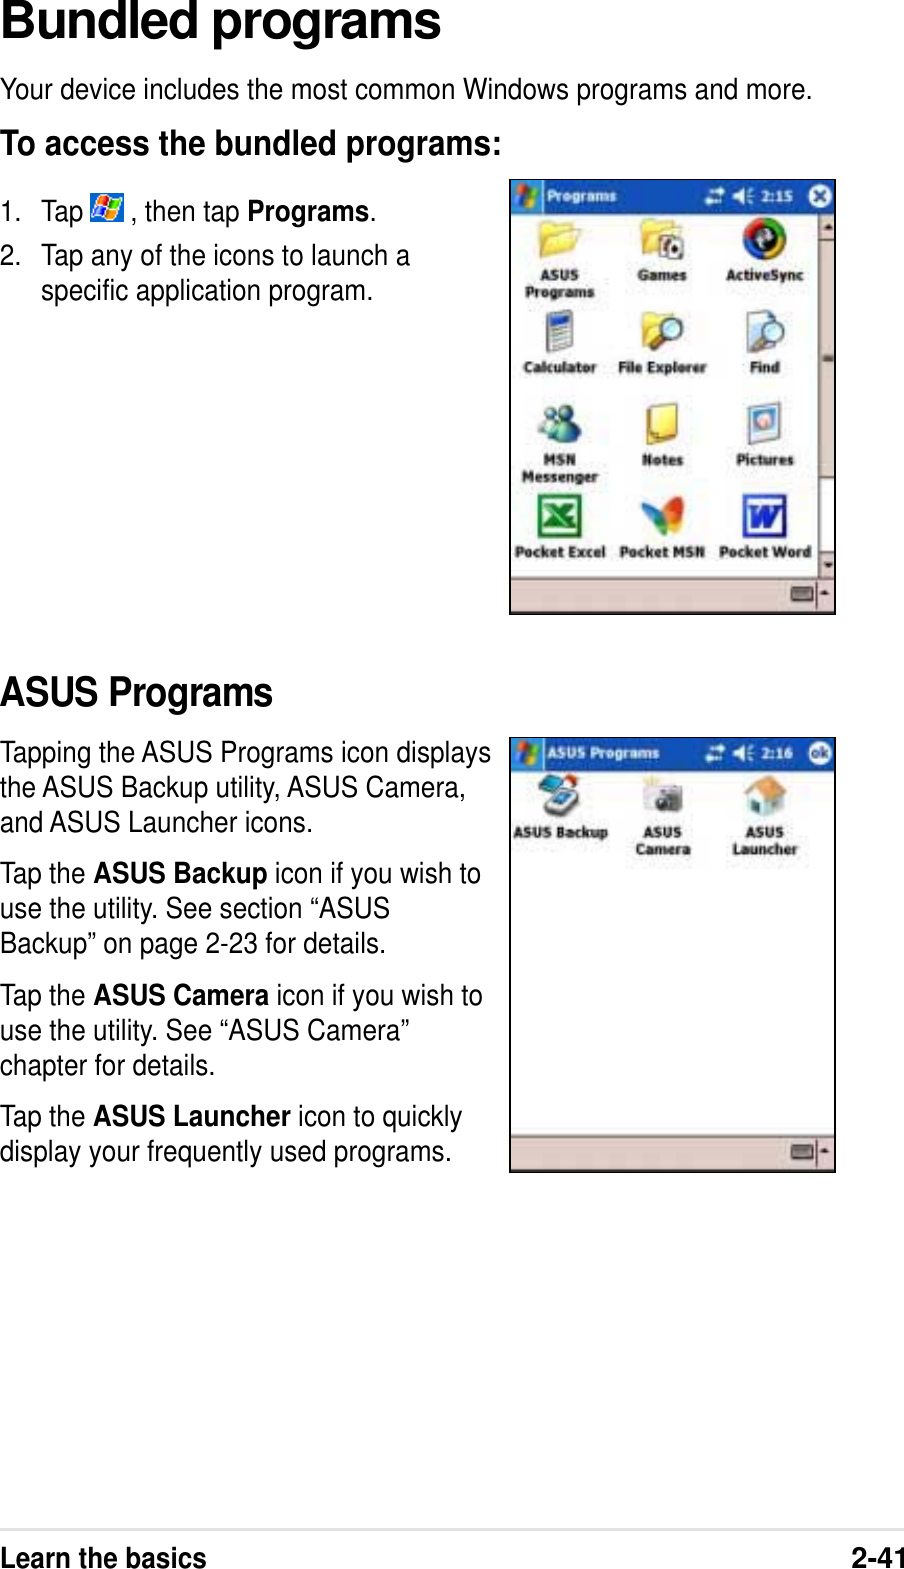 Learn the basics2-41Bundled programsYour device includes the most common Windows programs and more.To access the bundled programs:1. Tap   , then tap Programs.2. Tap any of the icons to launch aspecific application program.ASUS ProgramsTapping the ASUS Programs icon displaysthe ASUS Backup utility, ASUS Camera,and ASUS Launcher icons.Tap the ASUS Backup icon if you wish touse the utility. See section “ASUSBackup” on page 2-23 for details.Tap the ASUS Camera icon if you wish touse the utility. See “ASUS Camera”chapter for details.Tap the ASUS Launcher icon to quicklydisplay your frequently used programs.